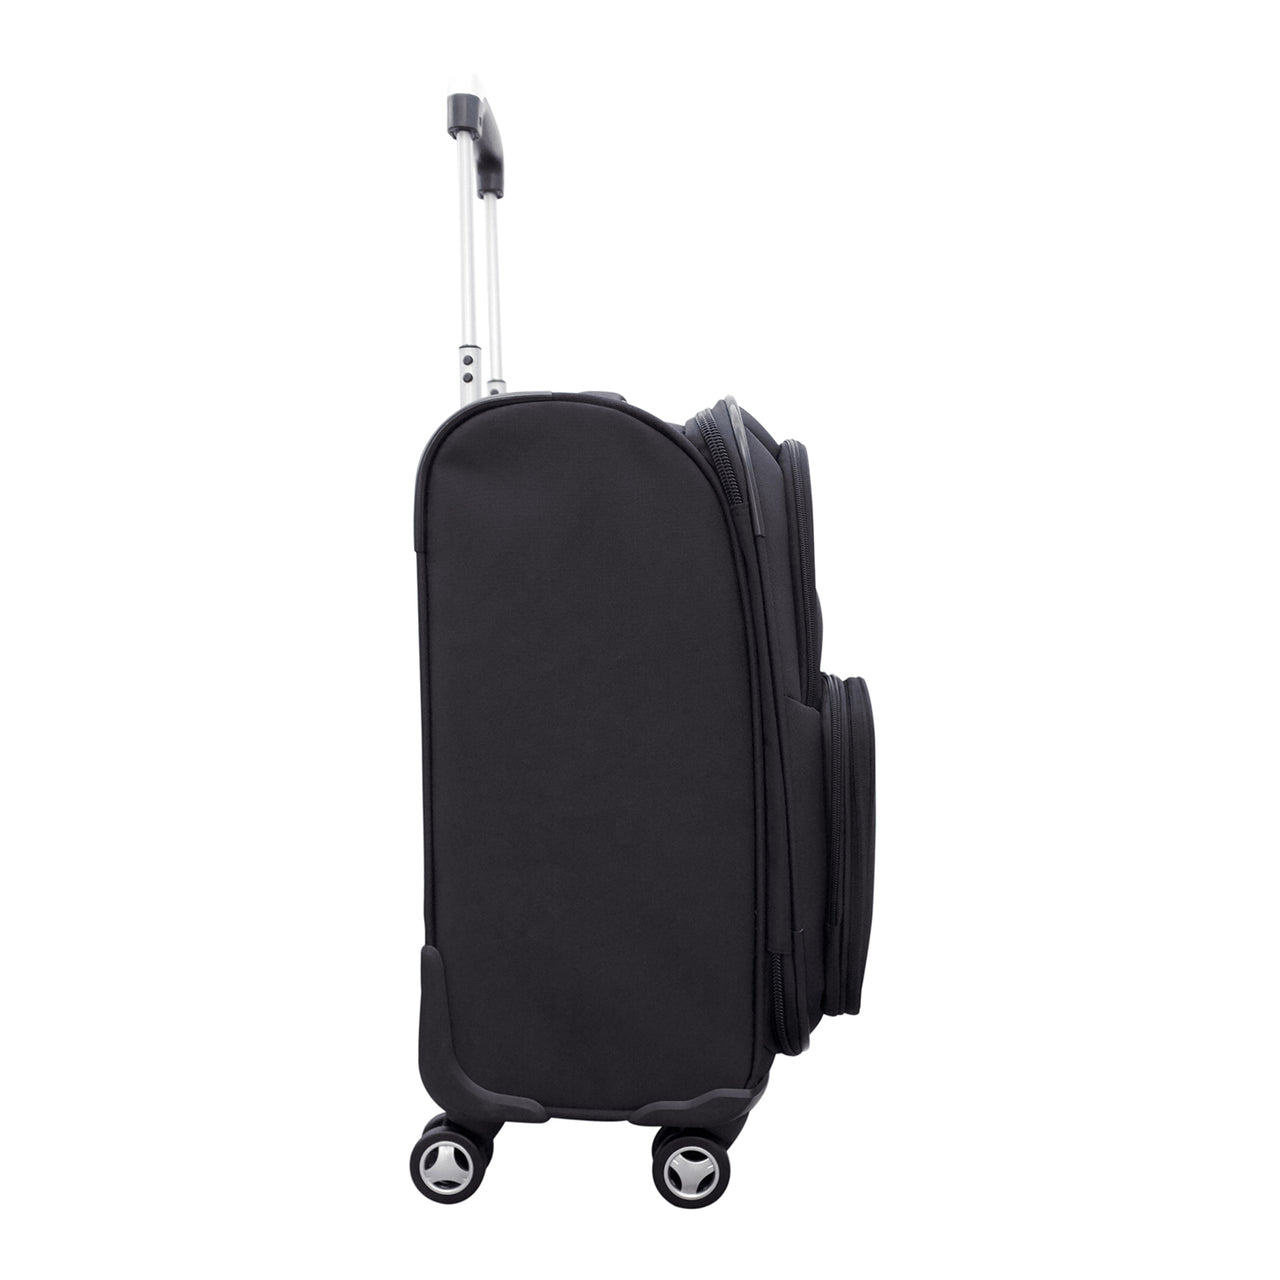 Sabres Luggage | Buffalo Sabres 21" Carry-on Spinner Luggage